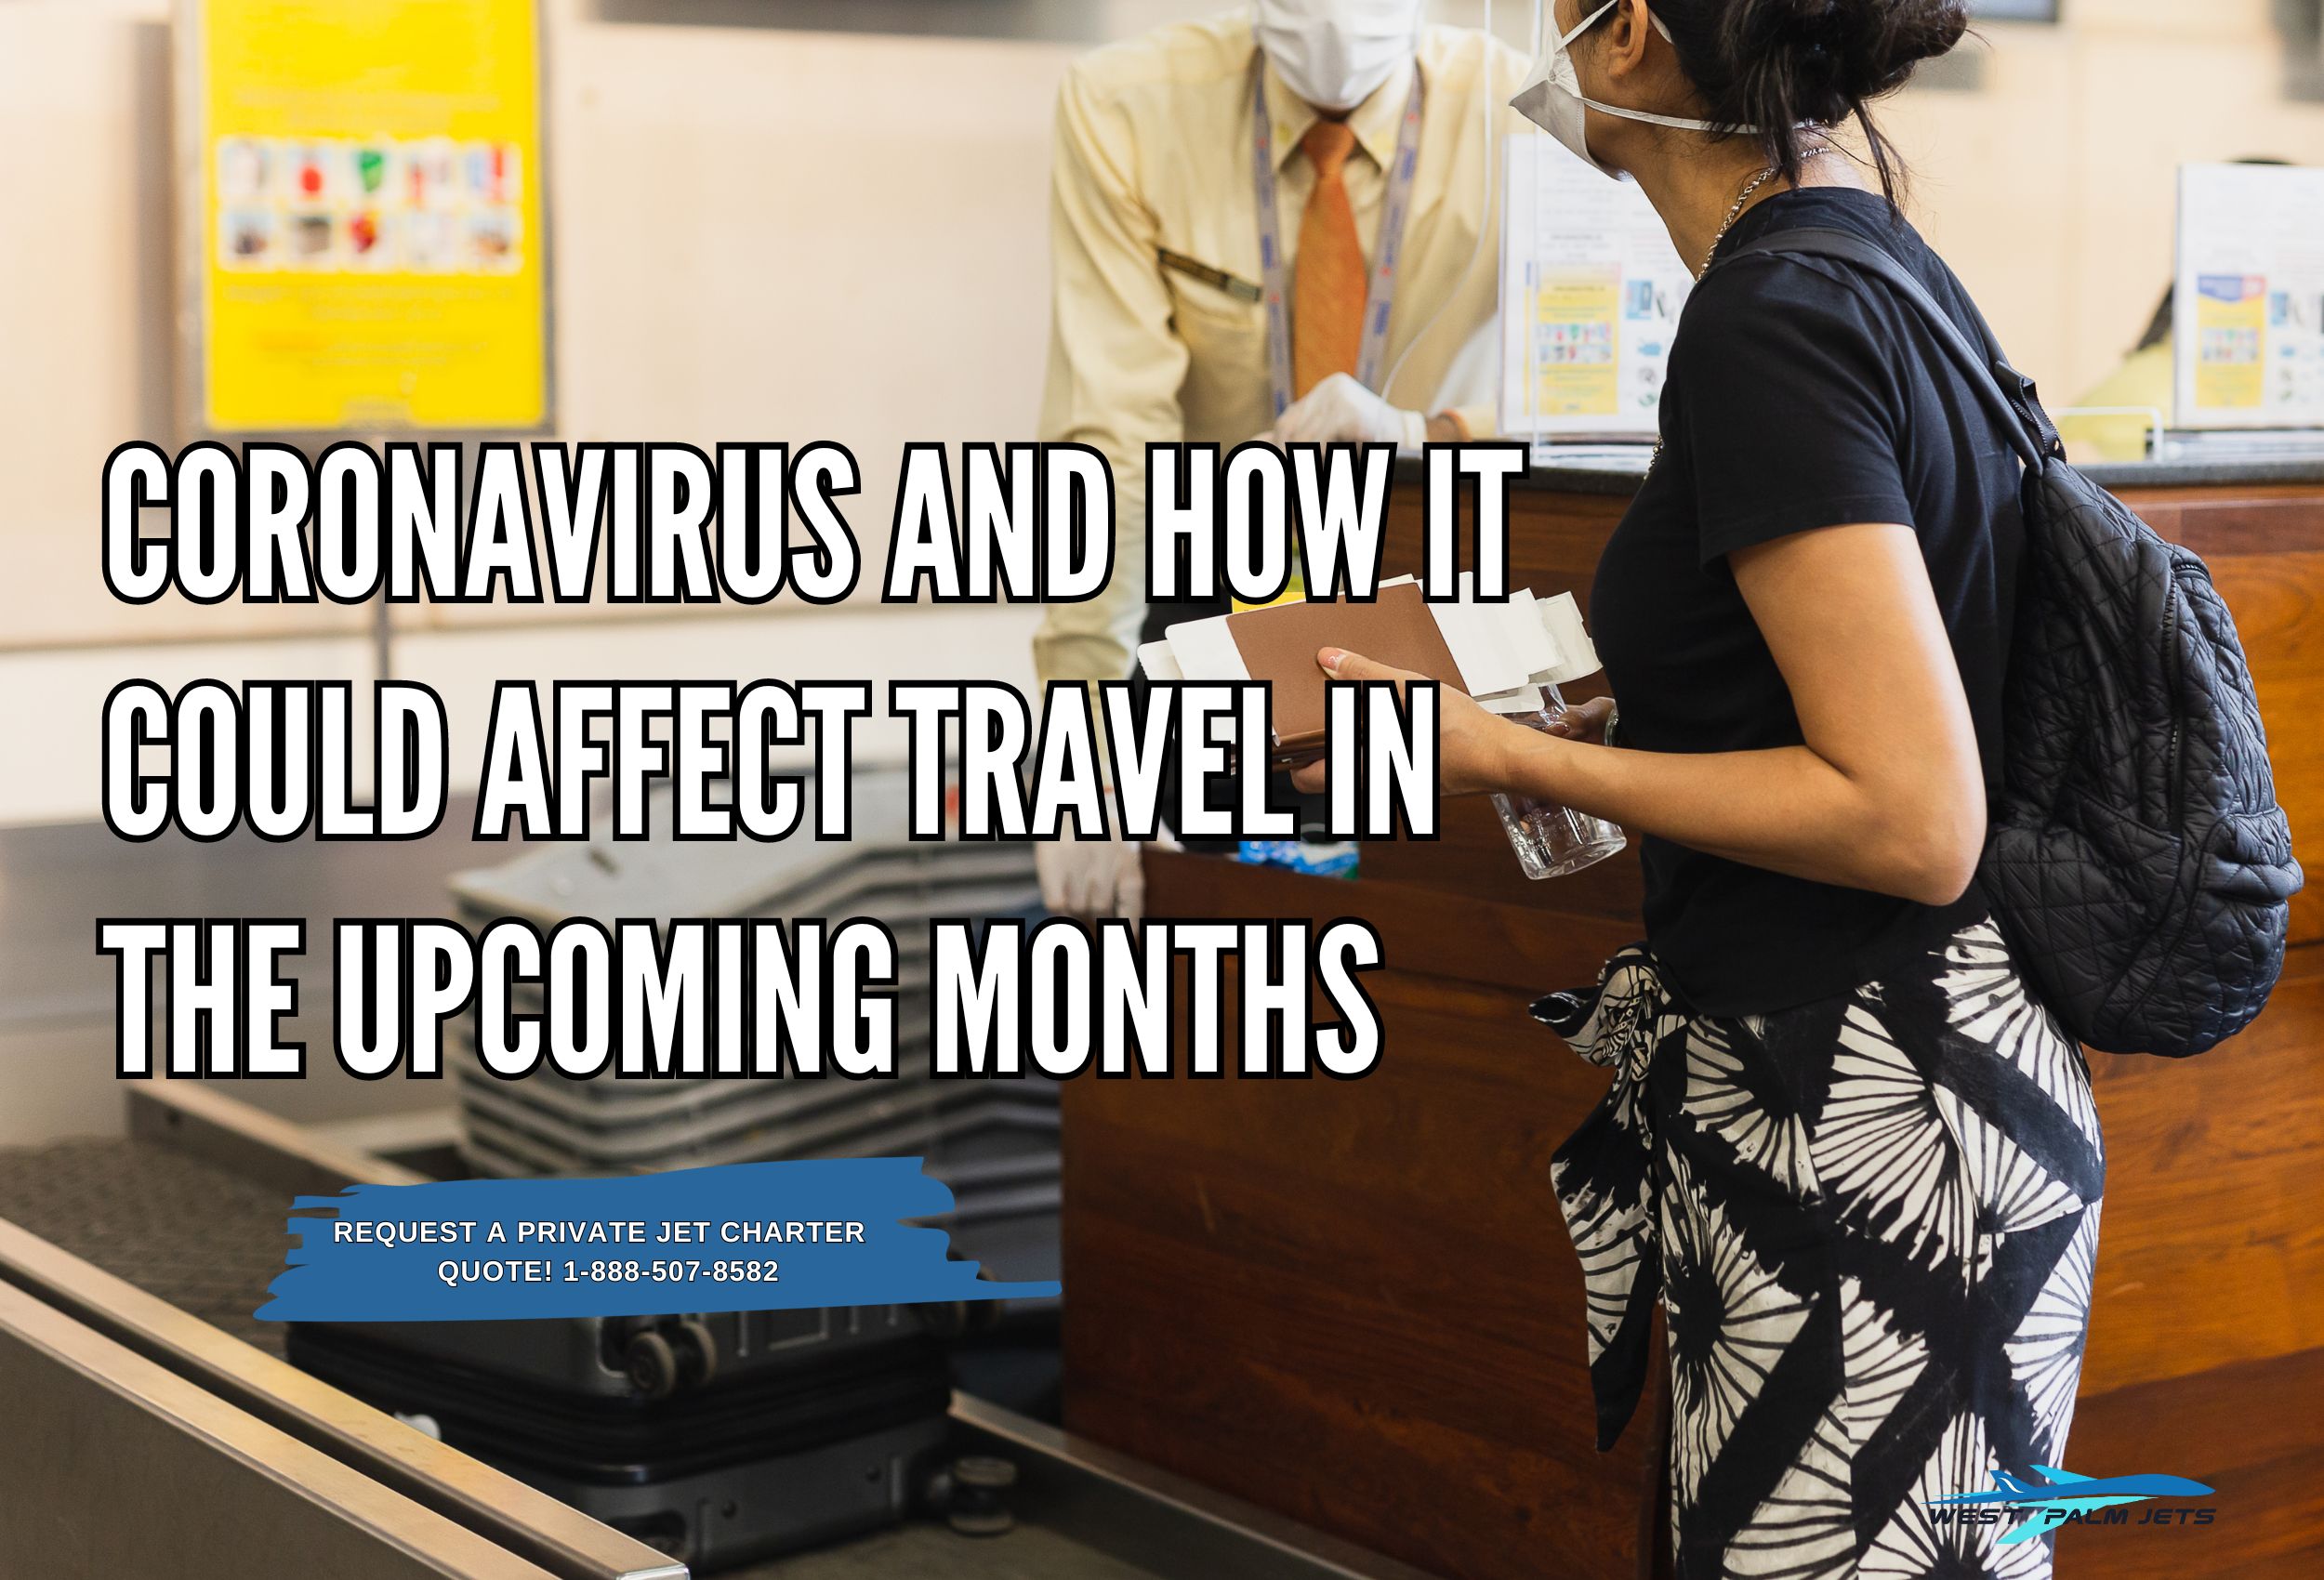 Coronavirus and How it Could Affect Travel in the Upcoming Months